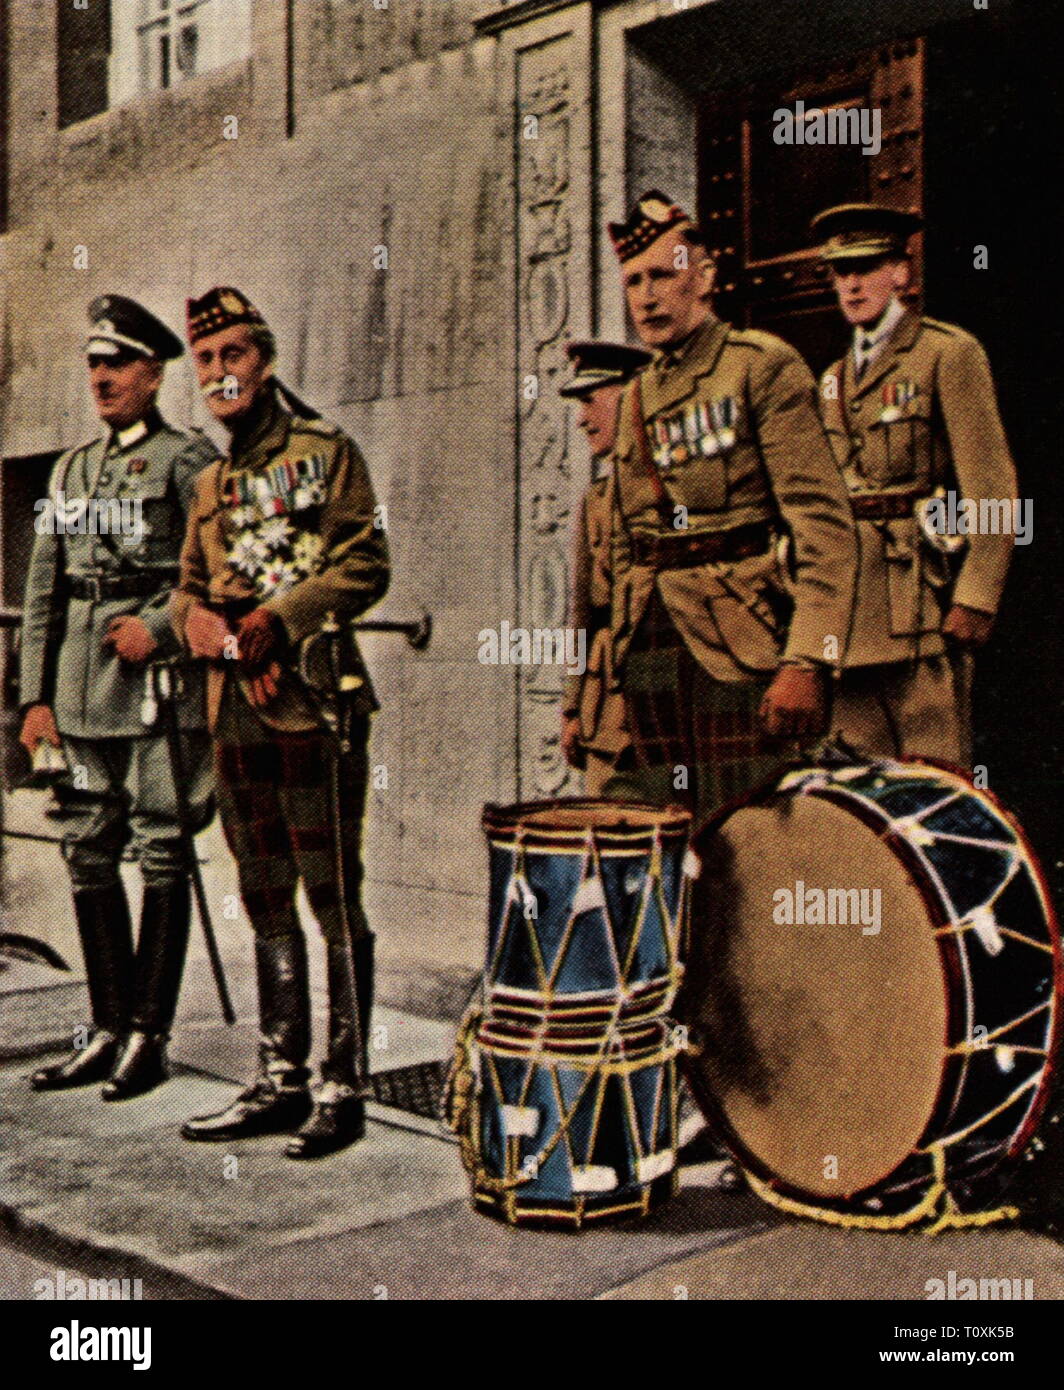 military, Great Britain, army, British general Ian Hamilton is receiving the drums of the Gordon Highlanders captured by the German 1914, Reichswehrministerium, Berlin, 5.2.1934, coloured photograph, cigarette card, series 'Die Nachkriegszeit', 1935, Bendlerblock, Scots, infantry, musician, musicians, soldiers, soldier, chivalrousness, chivalric, return, United Kingdom, Germany, German Reich, Third Reich, people, 20th century, 1930s, army, armies, general, generals, receiving, receive, capturing, capture, drum, drums, coloured, colored, post war , Additional-Rights-Clearance-Info-Not-Available Stock Photo